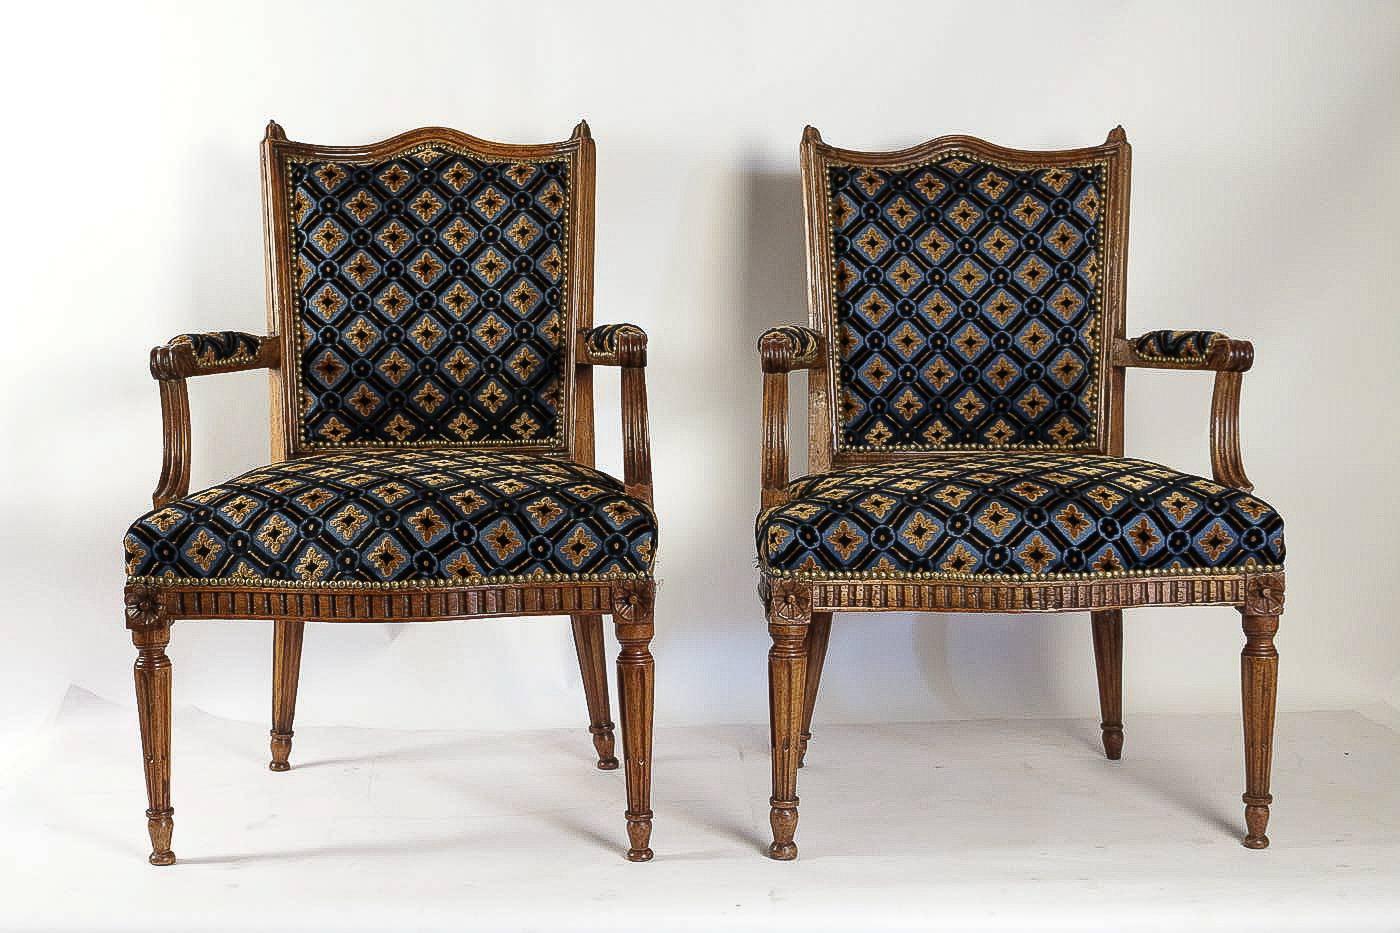 We are pleased to present you, a rare and unique pair of armchairs in hand-carved walnut, flower buds and serpentine fronted seat raised on fluted legs.

Elegance and magnificent mastery of the Art of the seat in this early-Louis XVI period pair